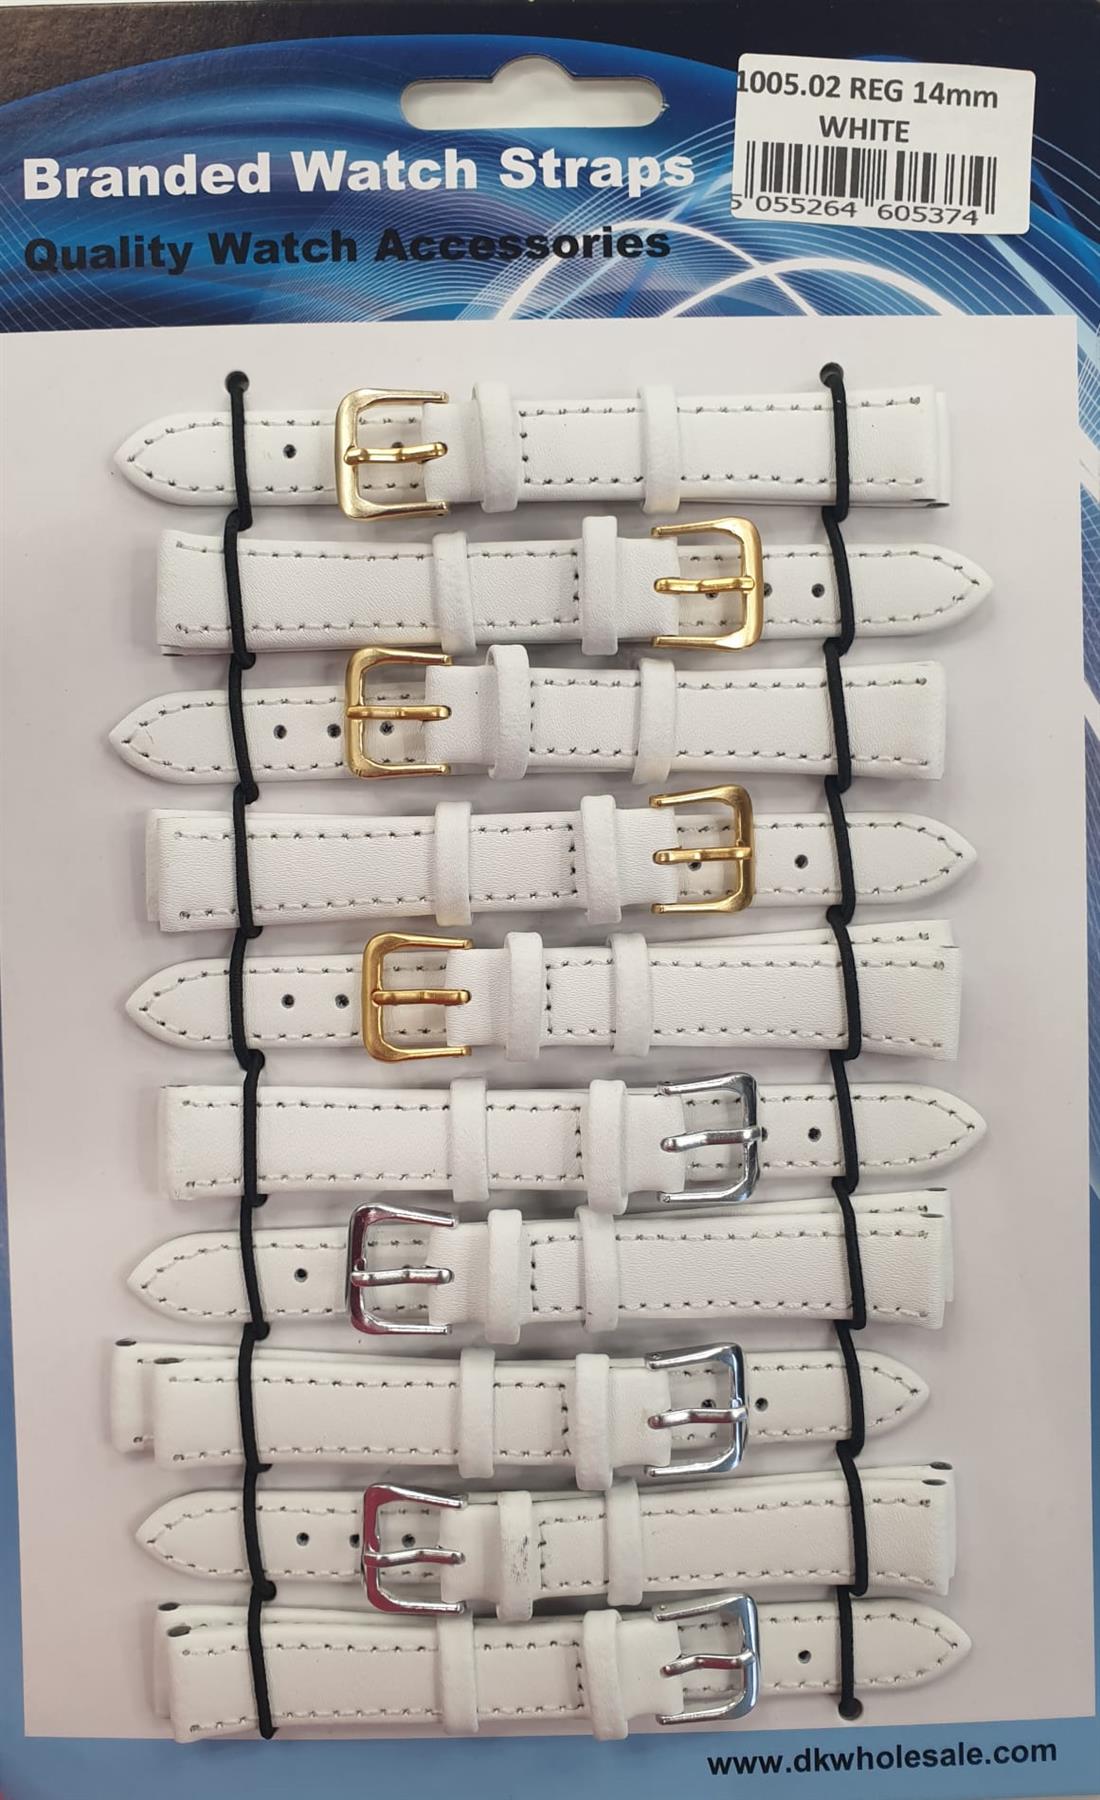 Leather White Watch Straps Pk10 Available sizes from 6mm To 24mm 1005.02